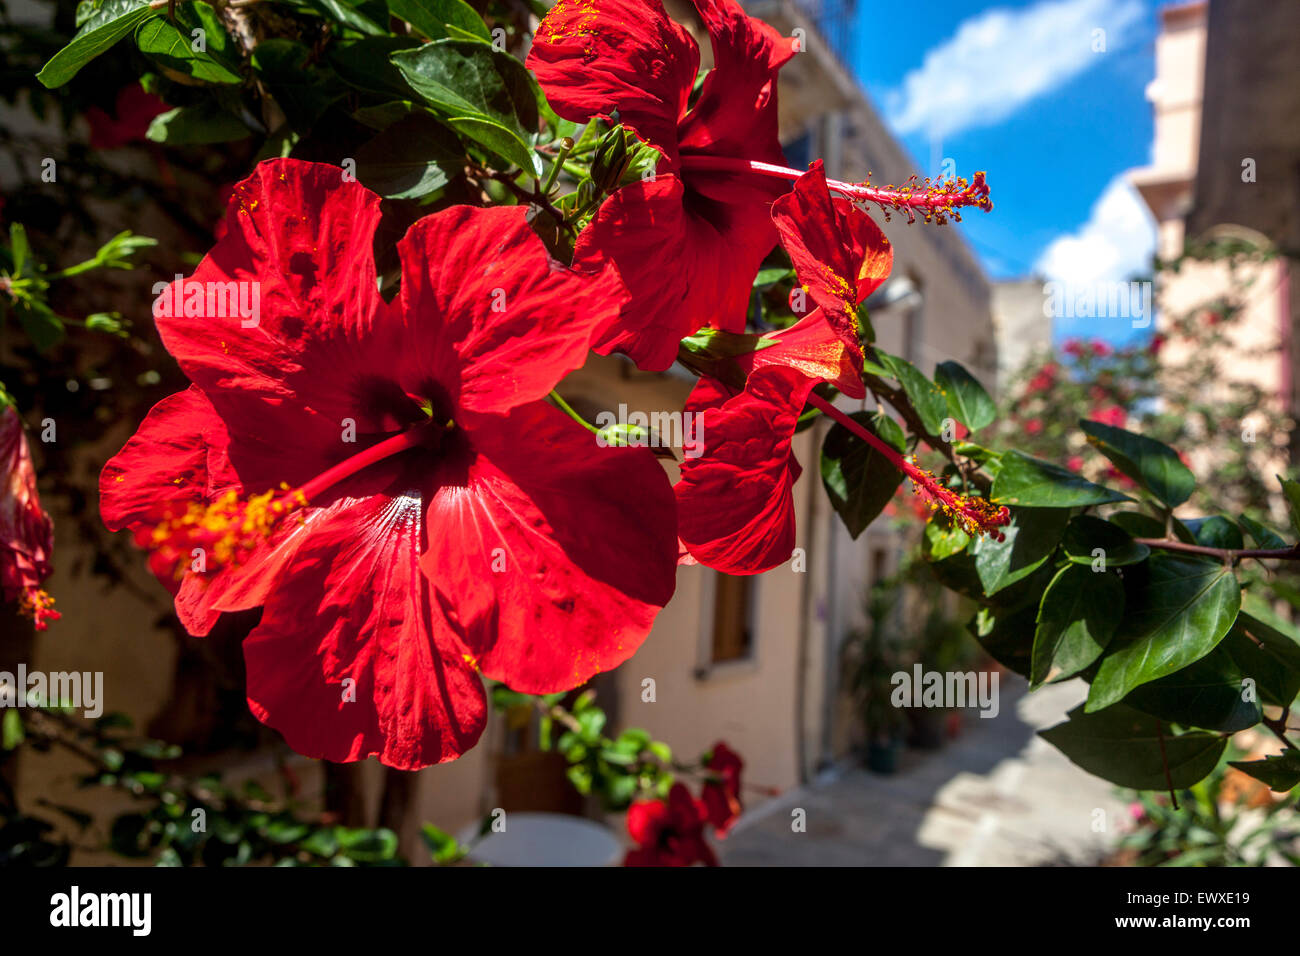 Red rose mallow flower, Rethymno Old Town street, Crete flowers Greece Hibiscus Rosa sinensis Stock Photo